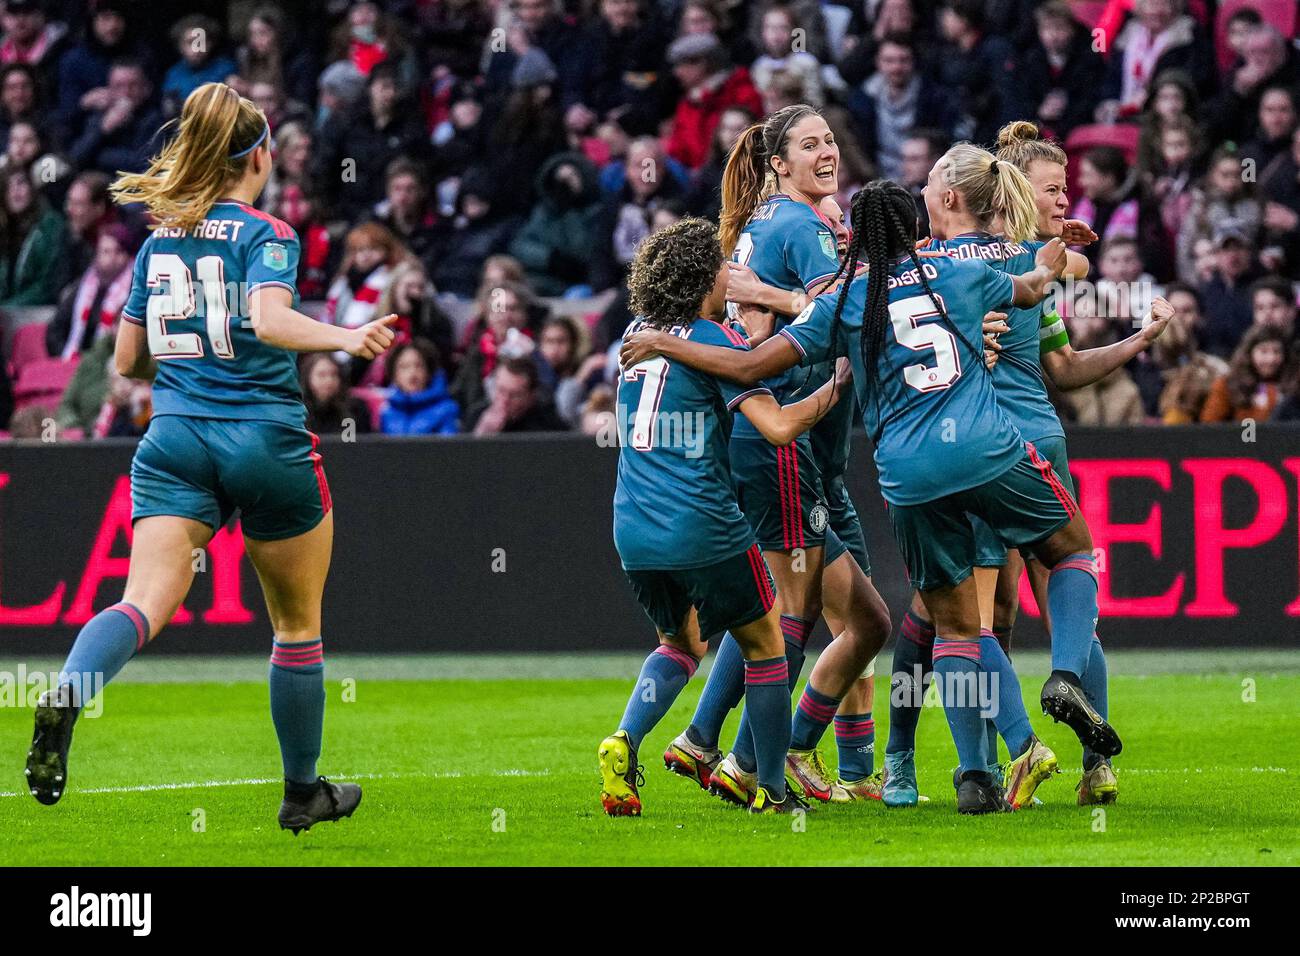 Amsterdam - Esmee de Graaf of Feyenoord V1 celebrates the 0-1 during the match between Ajax V1 v Feyenoord V1 at Johan Cruyff Arena on 4 March 2023 in Amsterdam, Netherlands. (Box to Box Pictures/Yannick Verhoeven) Stock Photo